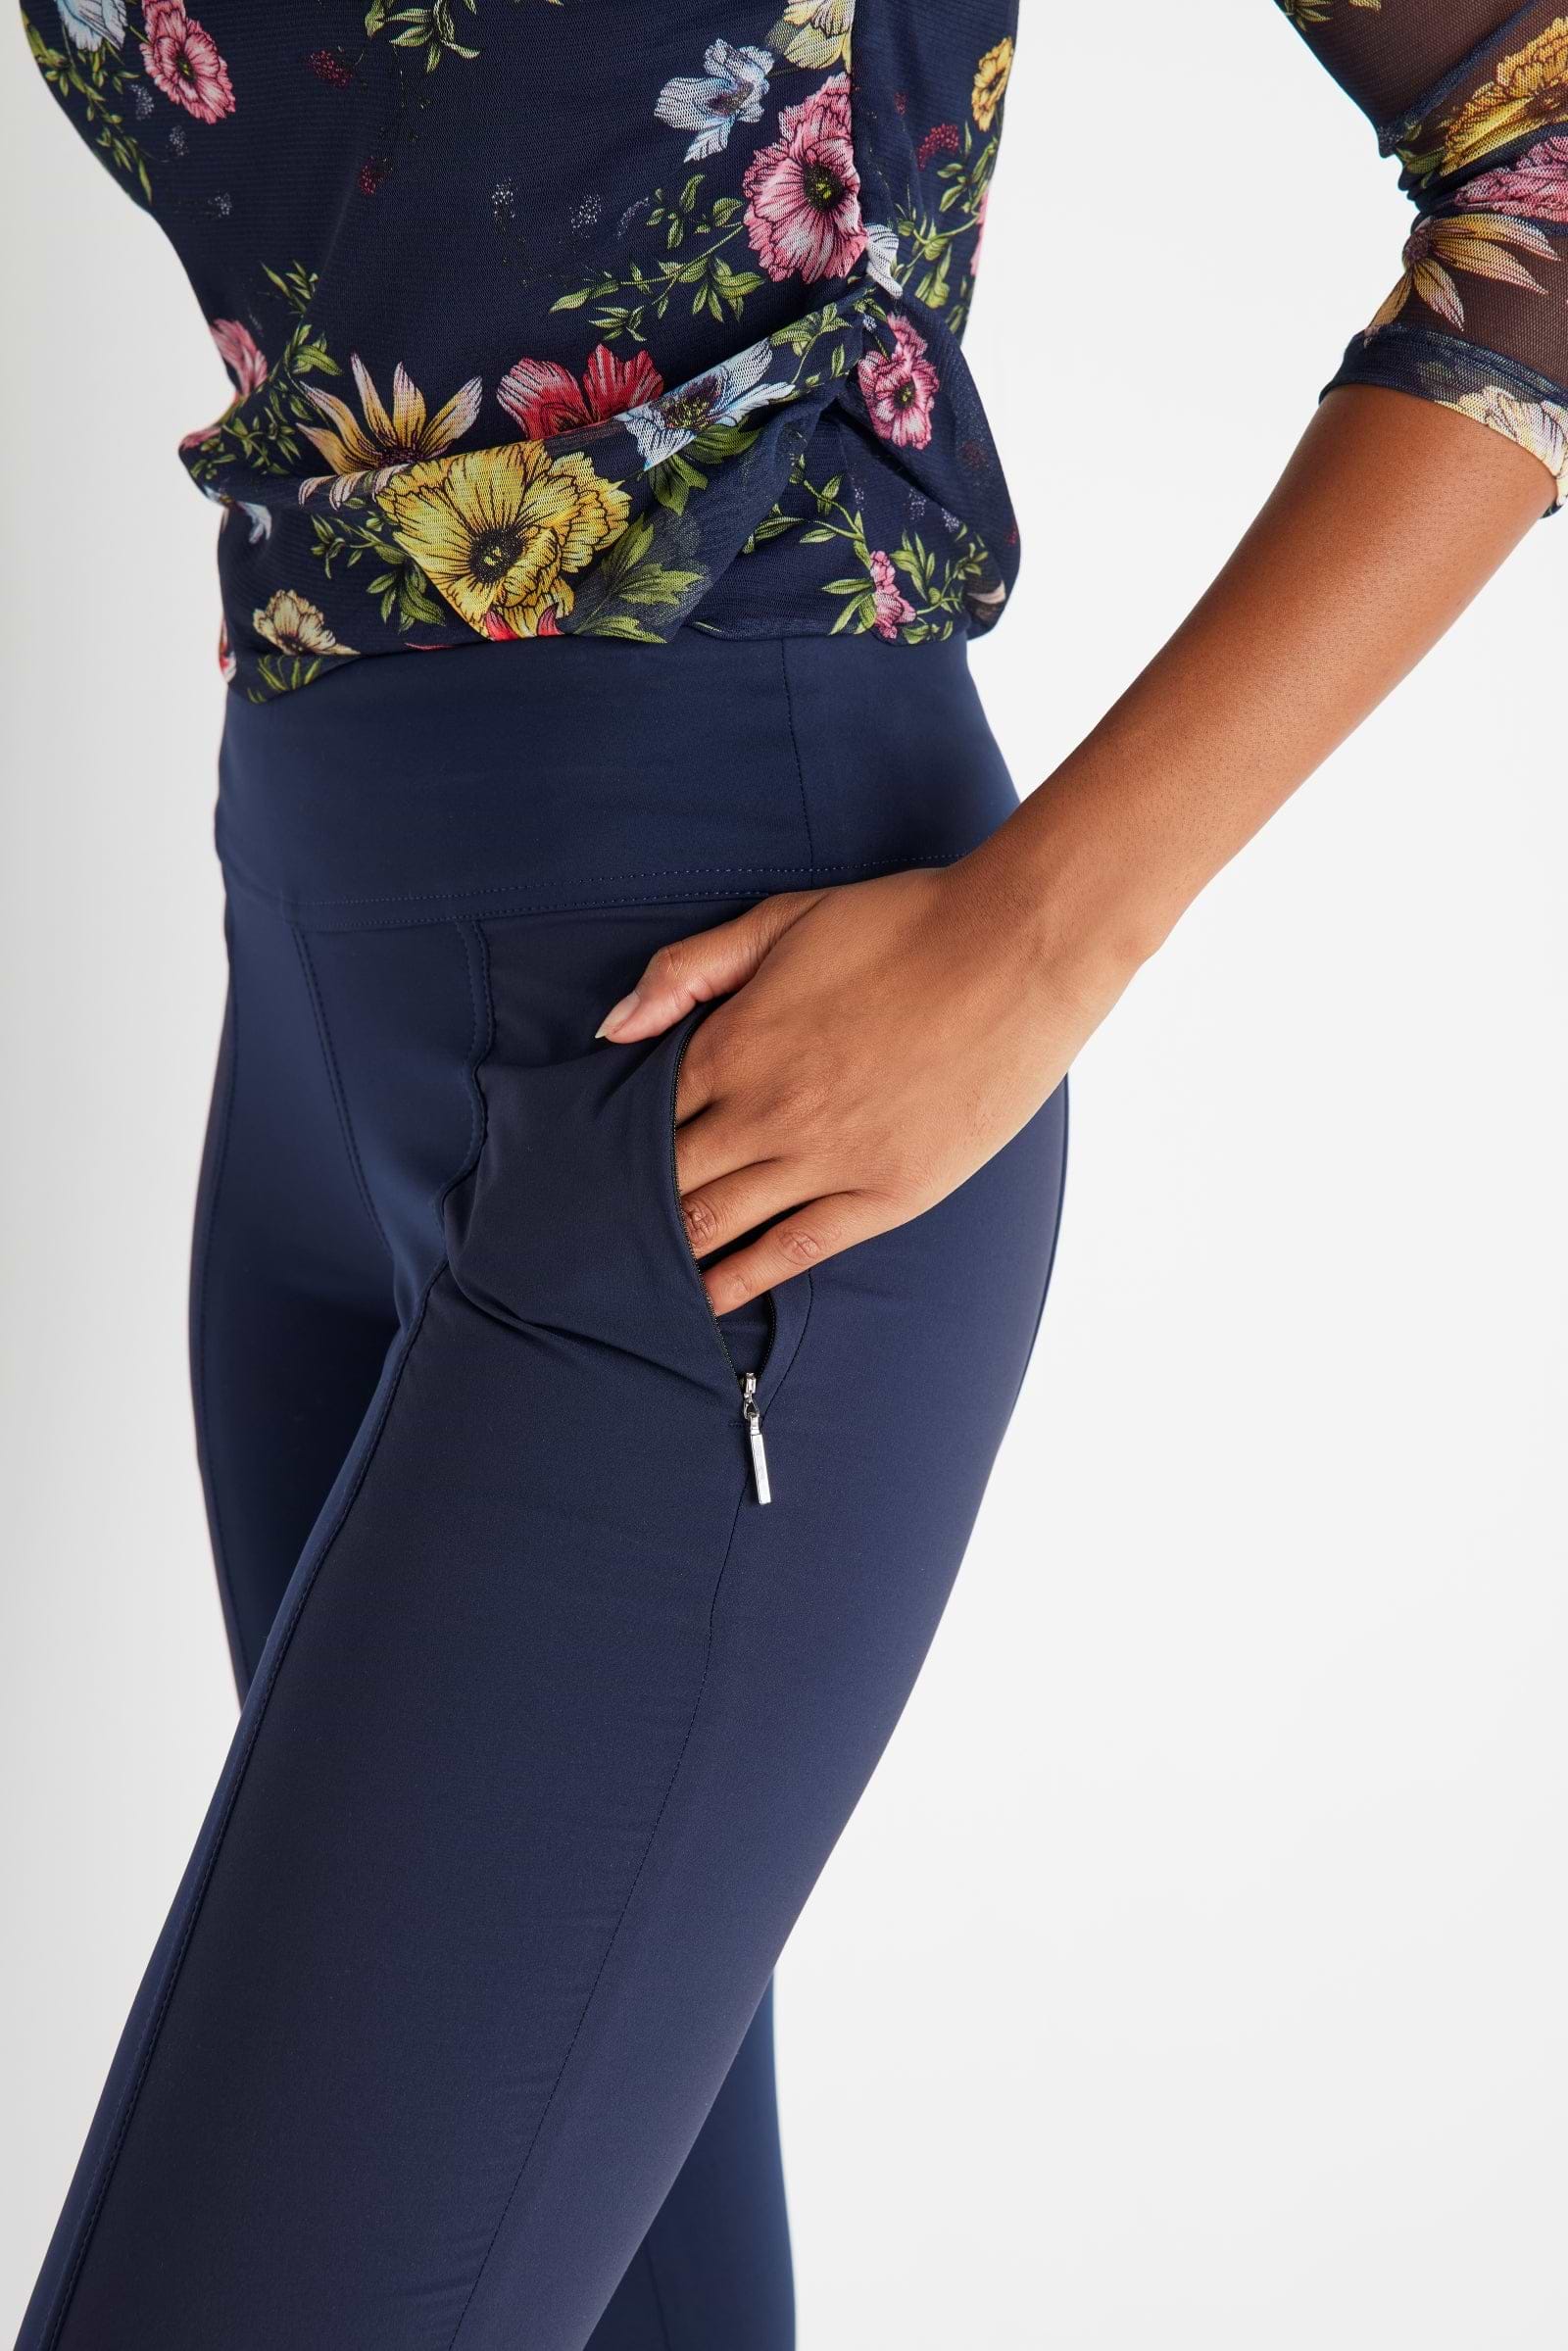 The Best Travel Pants. Front Pocket on Allie Pant in Navy